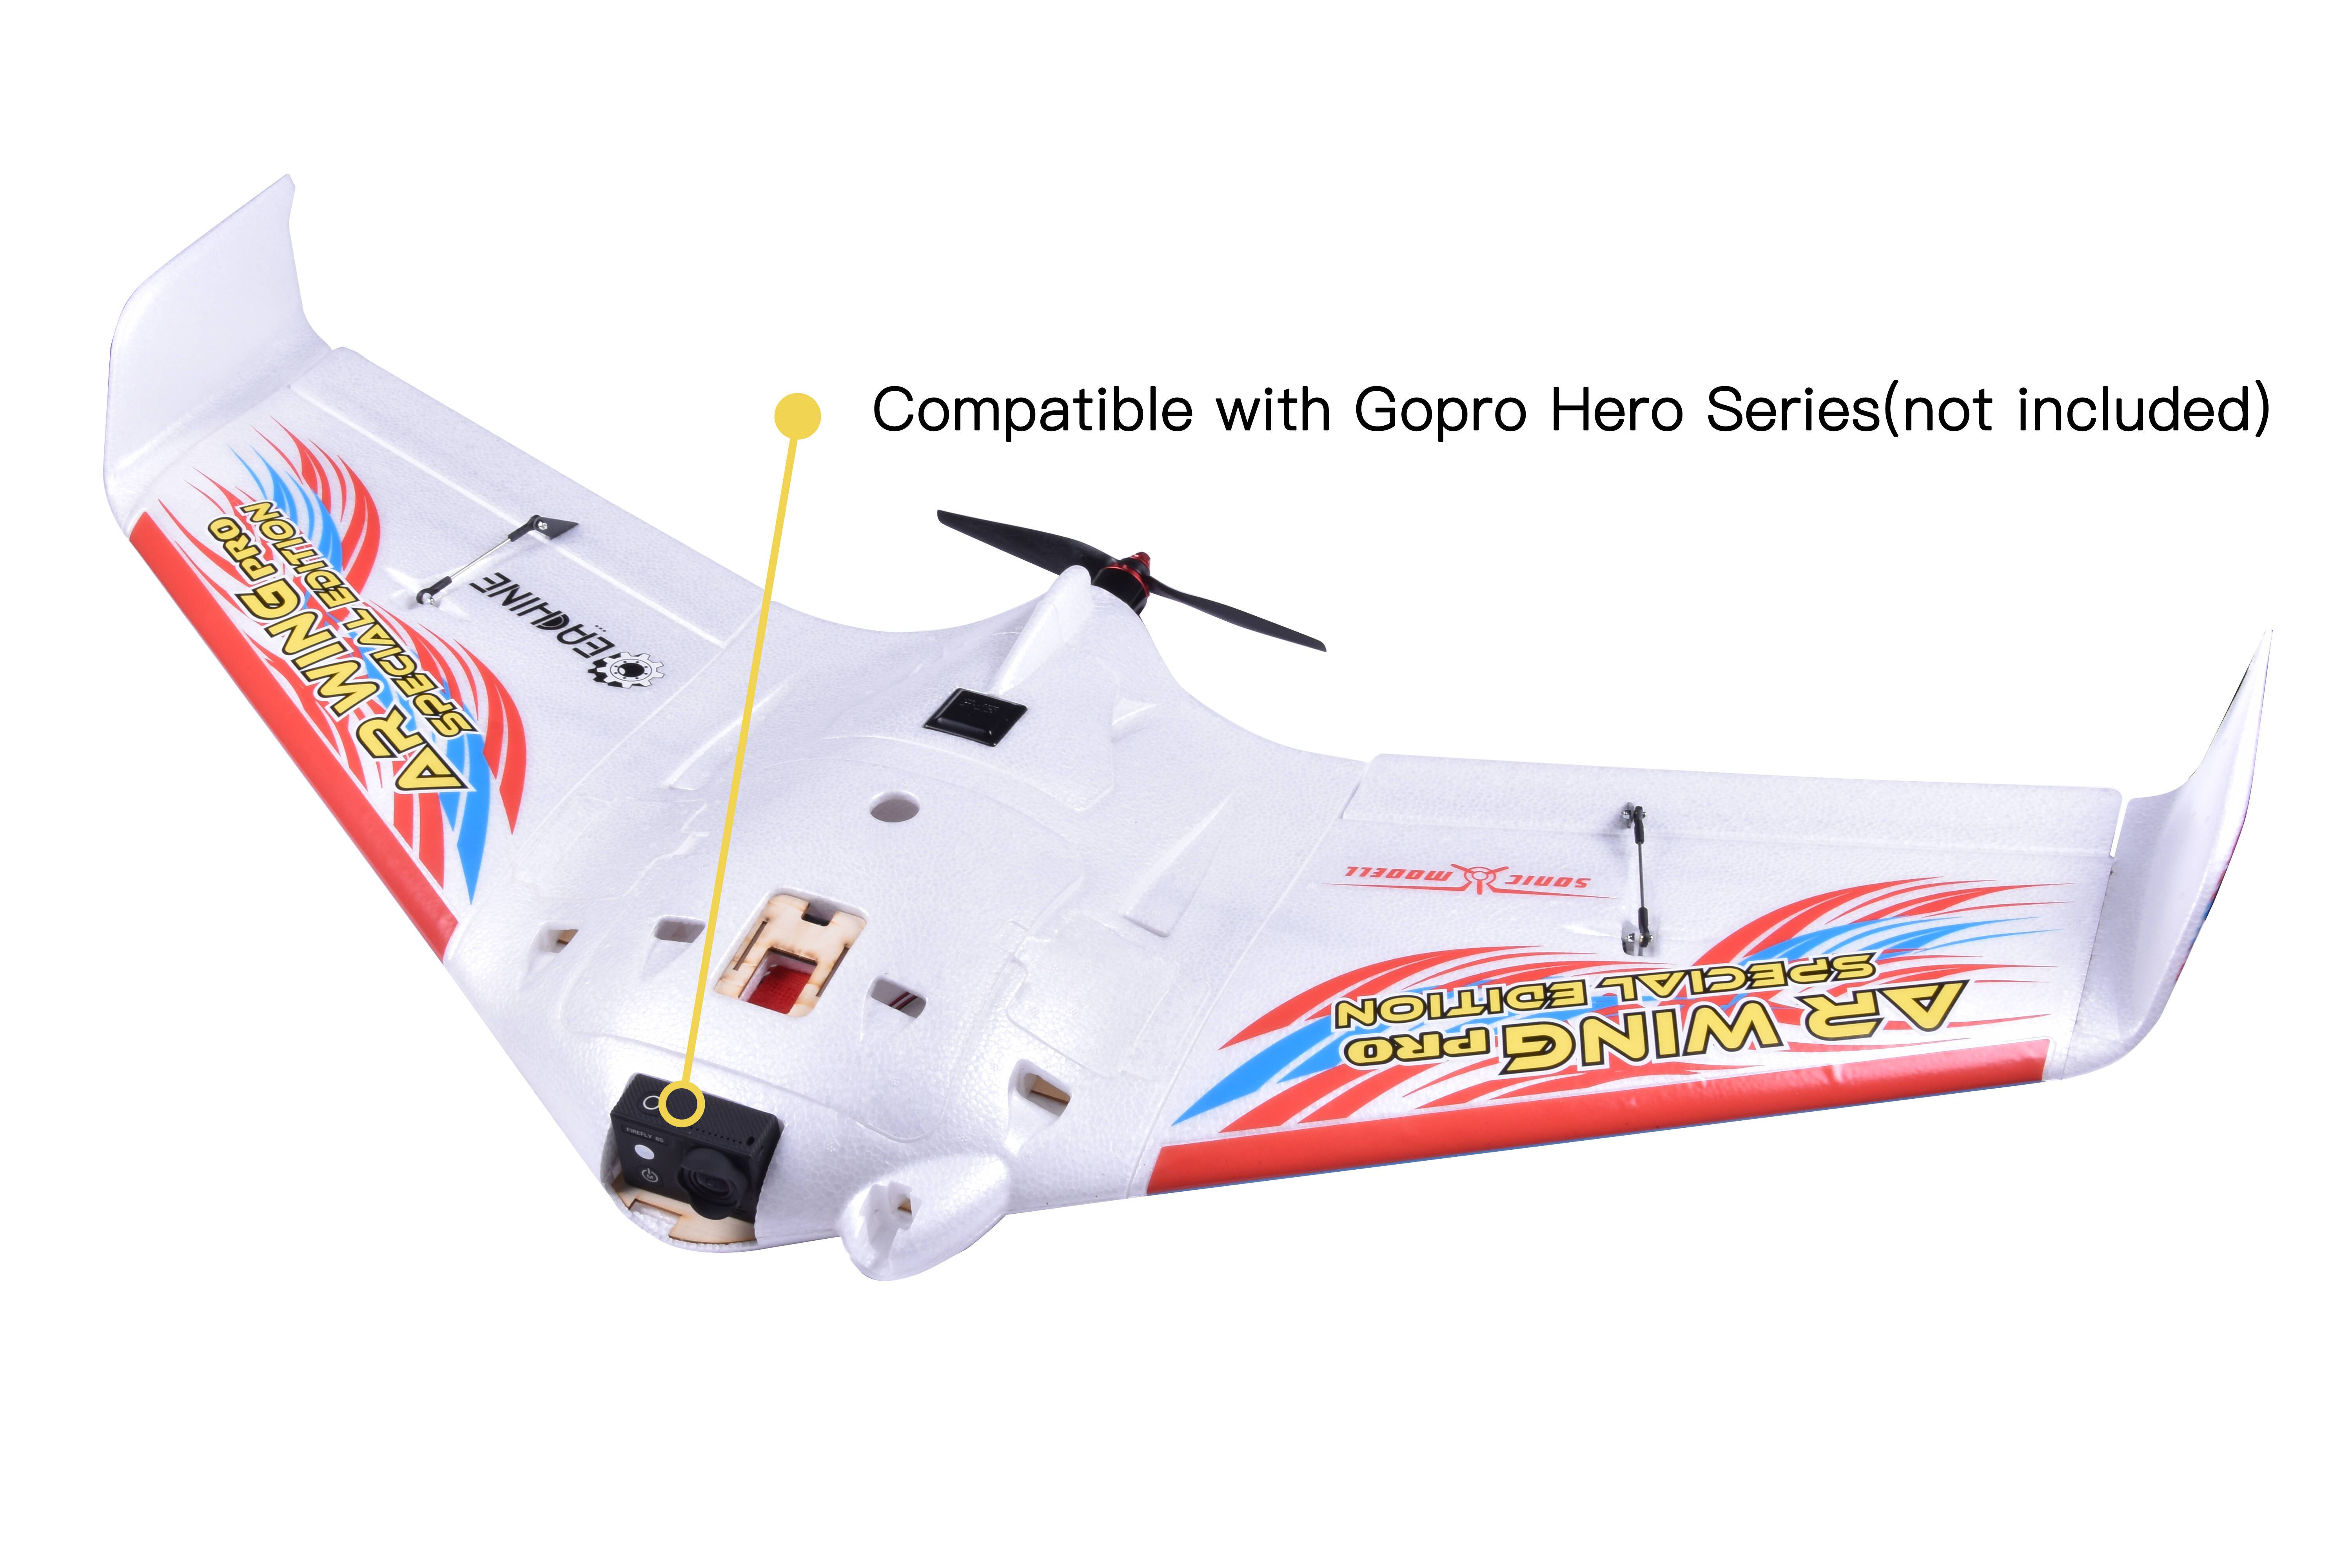 Eachine--Sonicmodell-AR-Wing-Pro-Special-Edition-1000mm-Wingspan-EPP-FPV-Flying-Wing-RC-Airplane-KIT-1857256-4